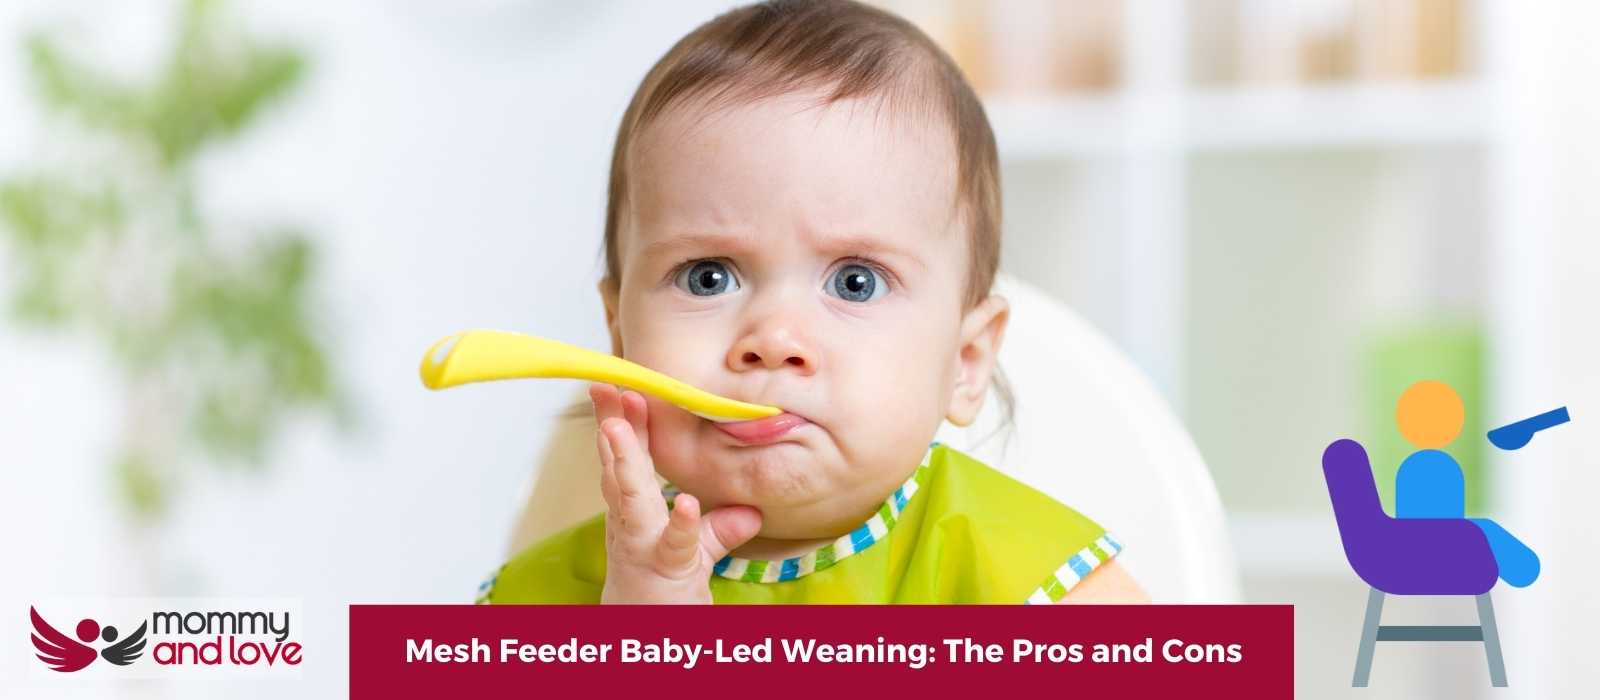 Mesh Feeder Baby-Led Weaning The Pros and Cons